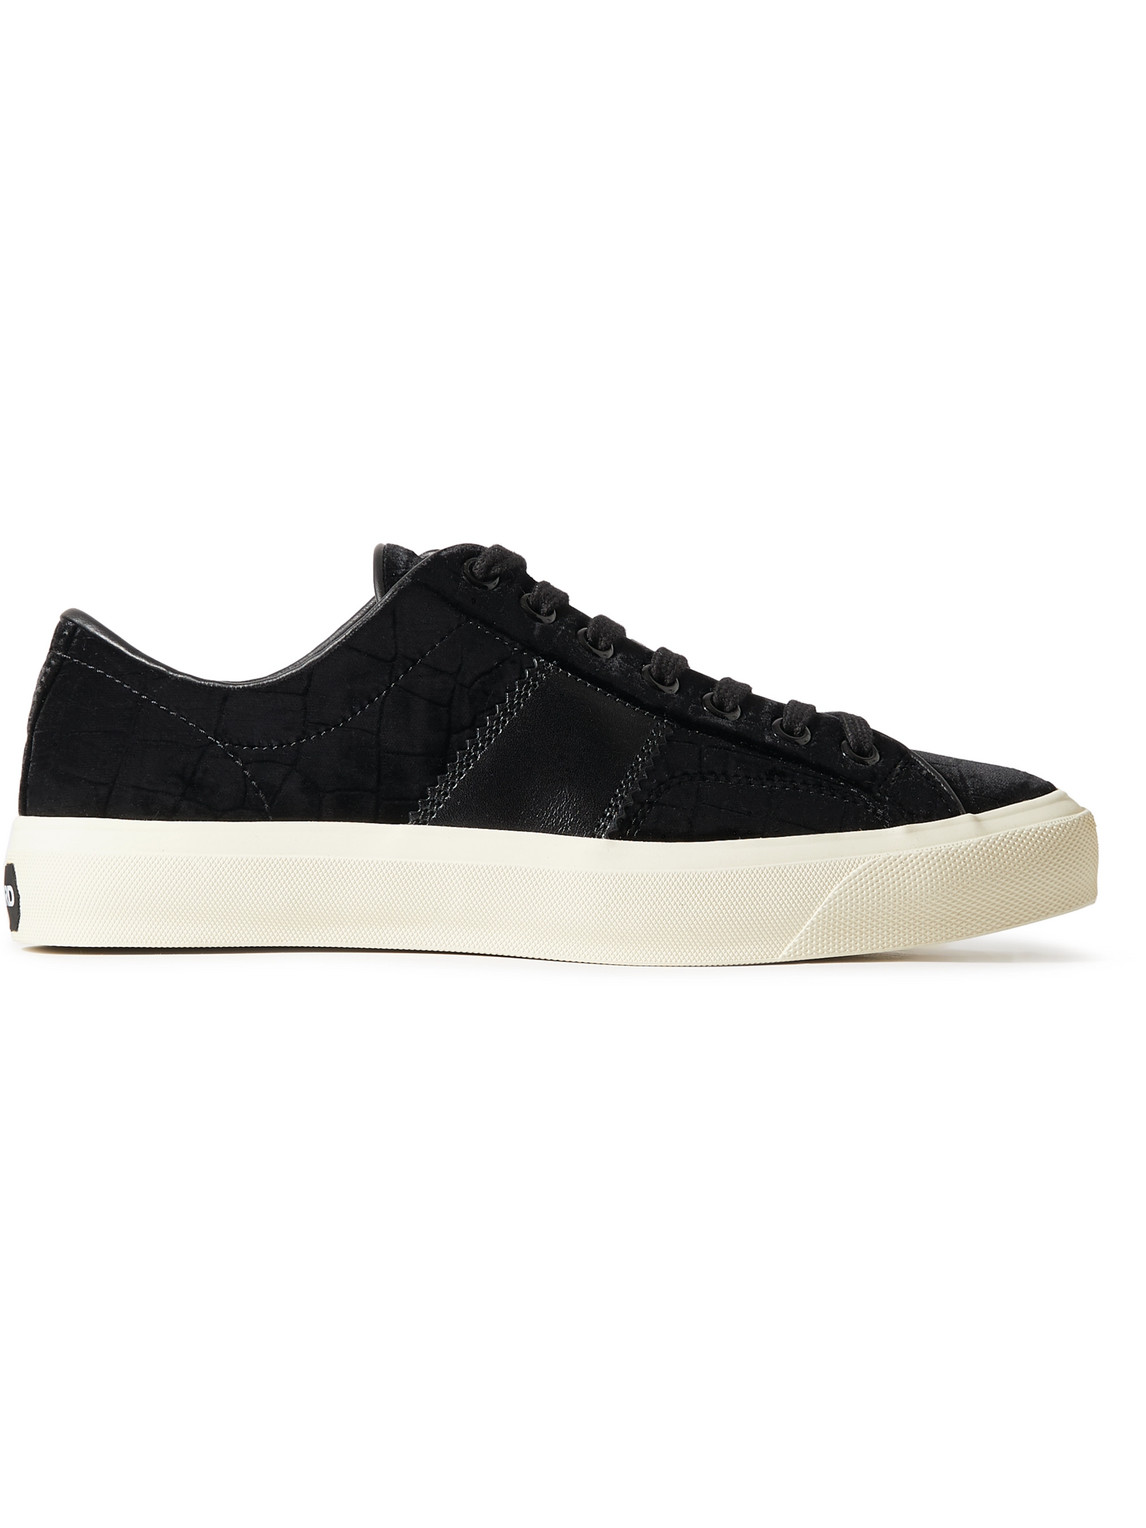 Tom Ford Radcliffe Leather-trimmed Nubuck Sneakers In Black